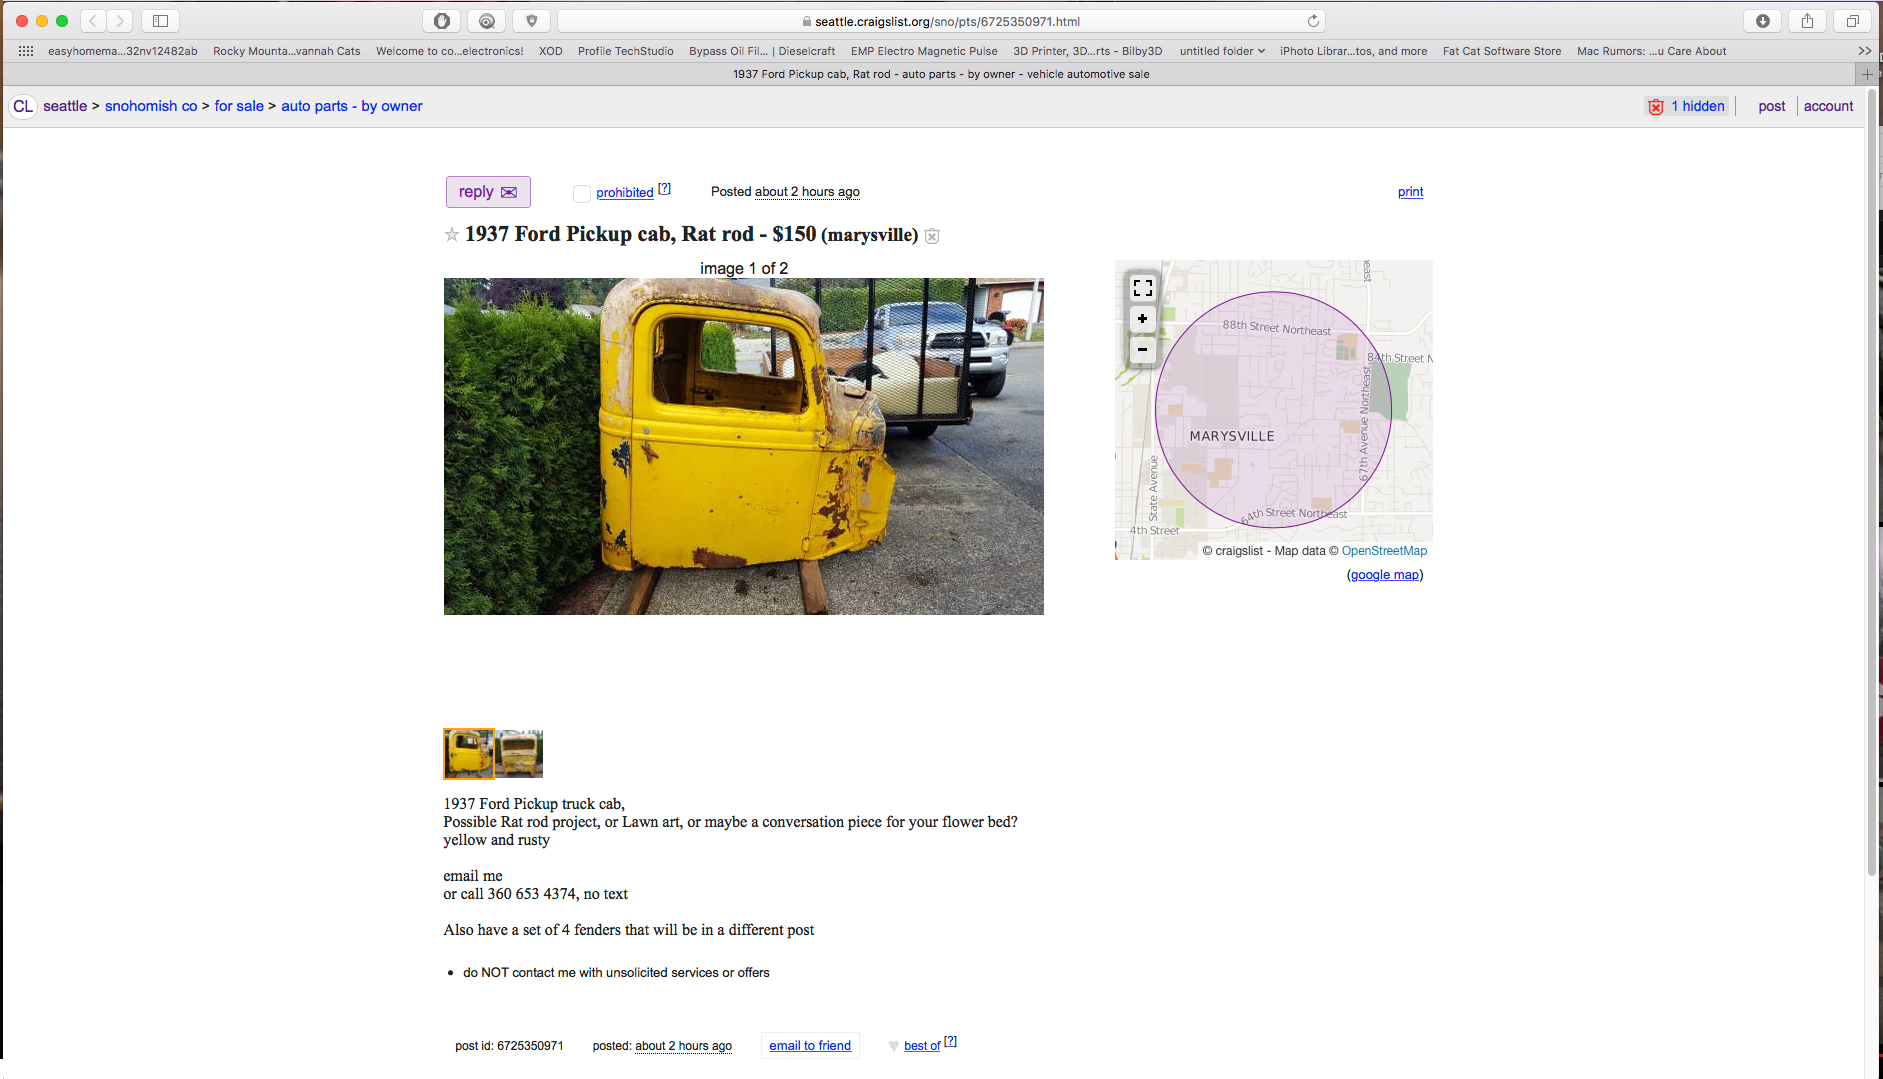 Fun Craigslist.Org finds. Post them here. - Ford Truck ...